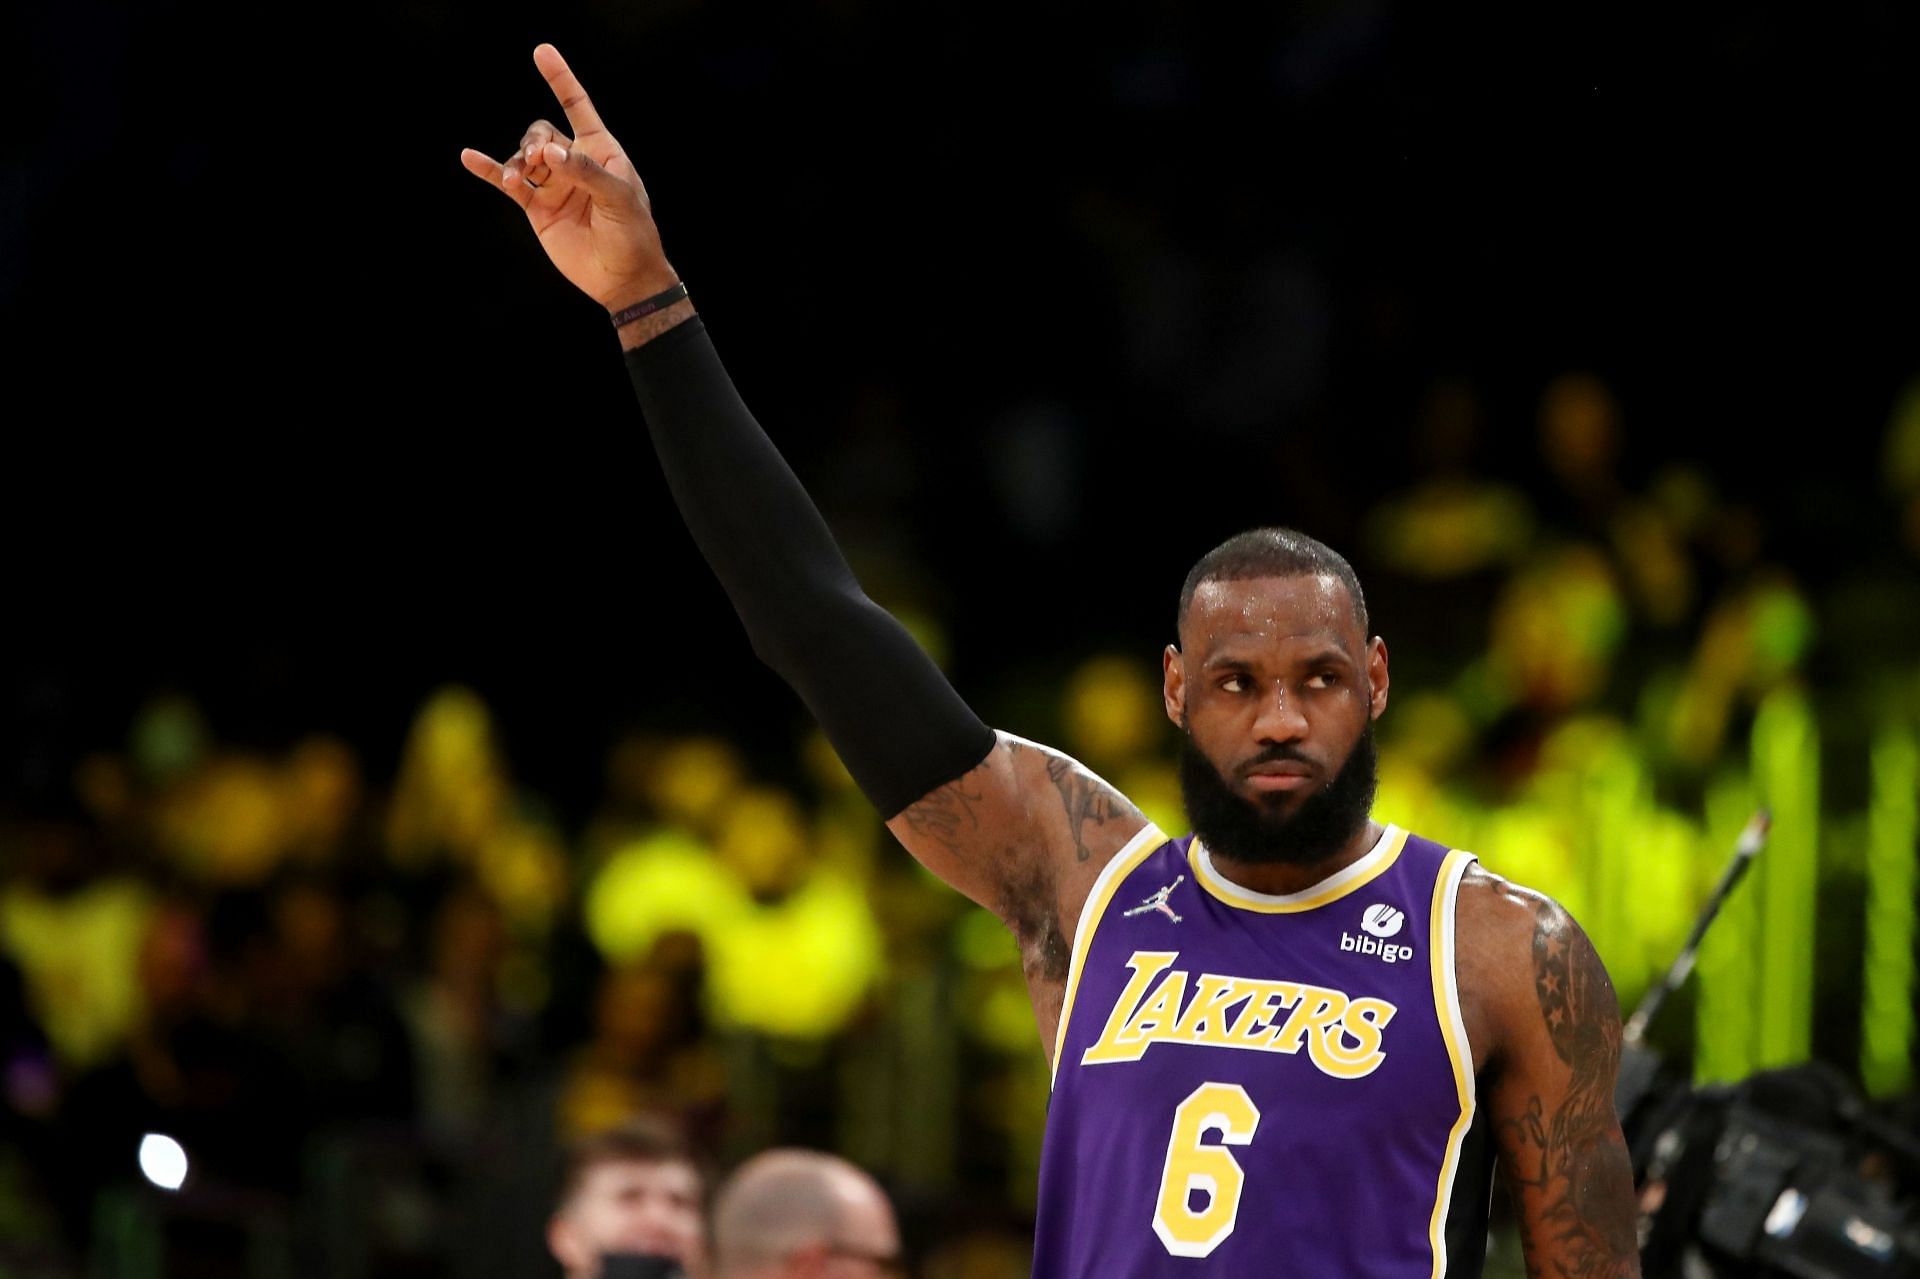 LeBron James of the LA Lakers acknowledges the crowd during a win over the Utah Jazz at Crypto.com Arena on Wednesday in Los Angeles, California.